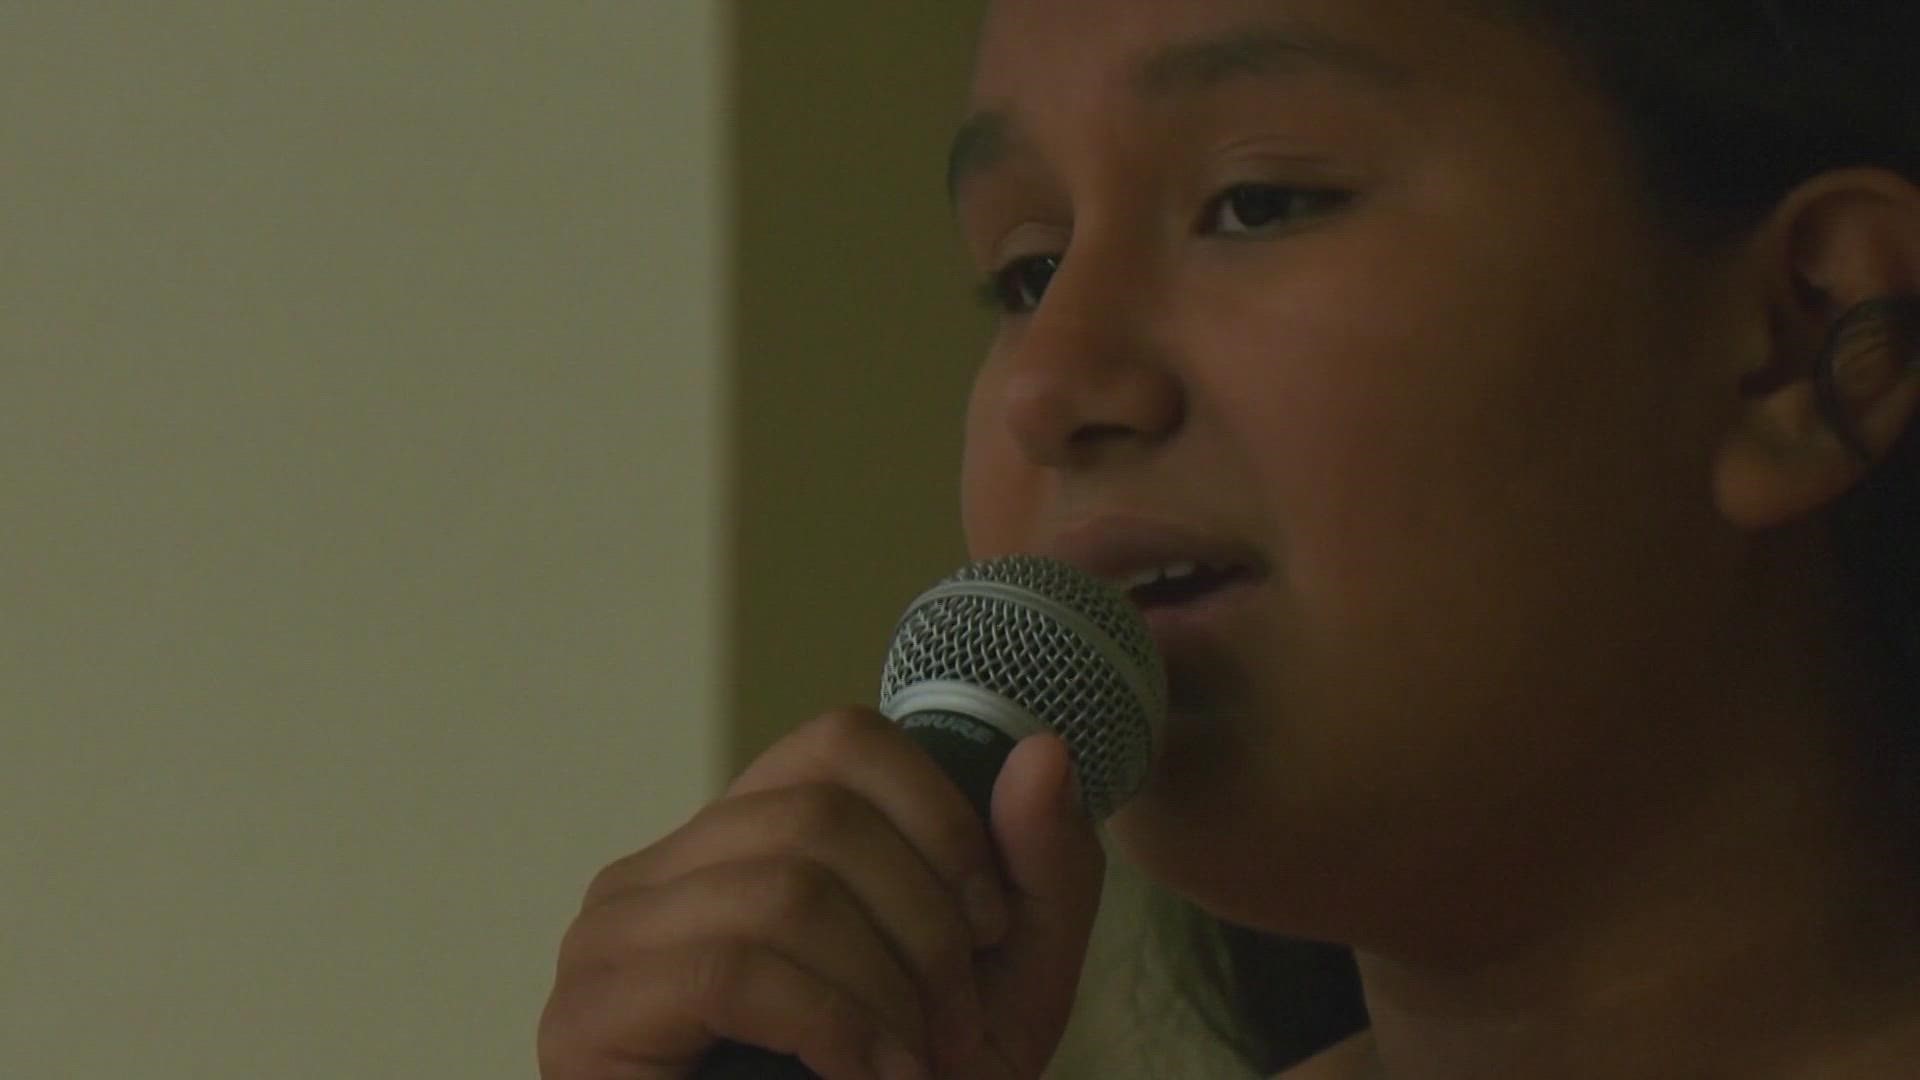 Bella Barboza sang in honor of her friend, Ellie Garcia, who died in the mass shooting at Robb Elementary.